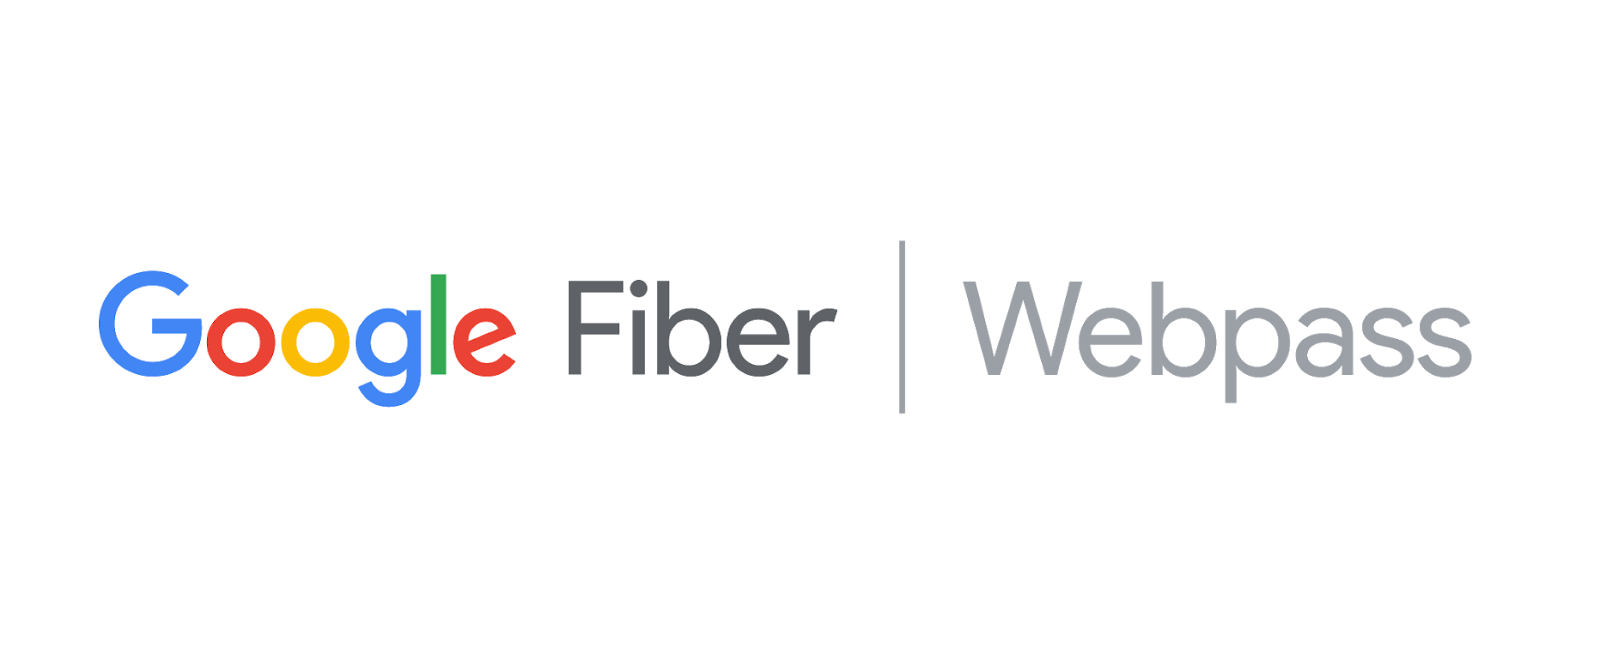 What Is Google Fiber? And What Is Webpass?